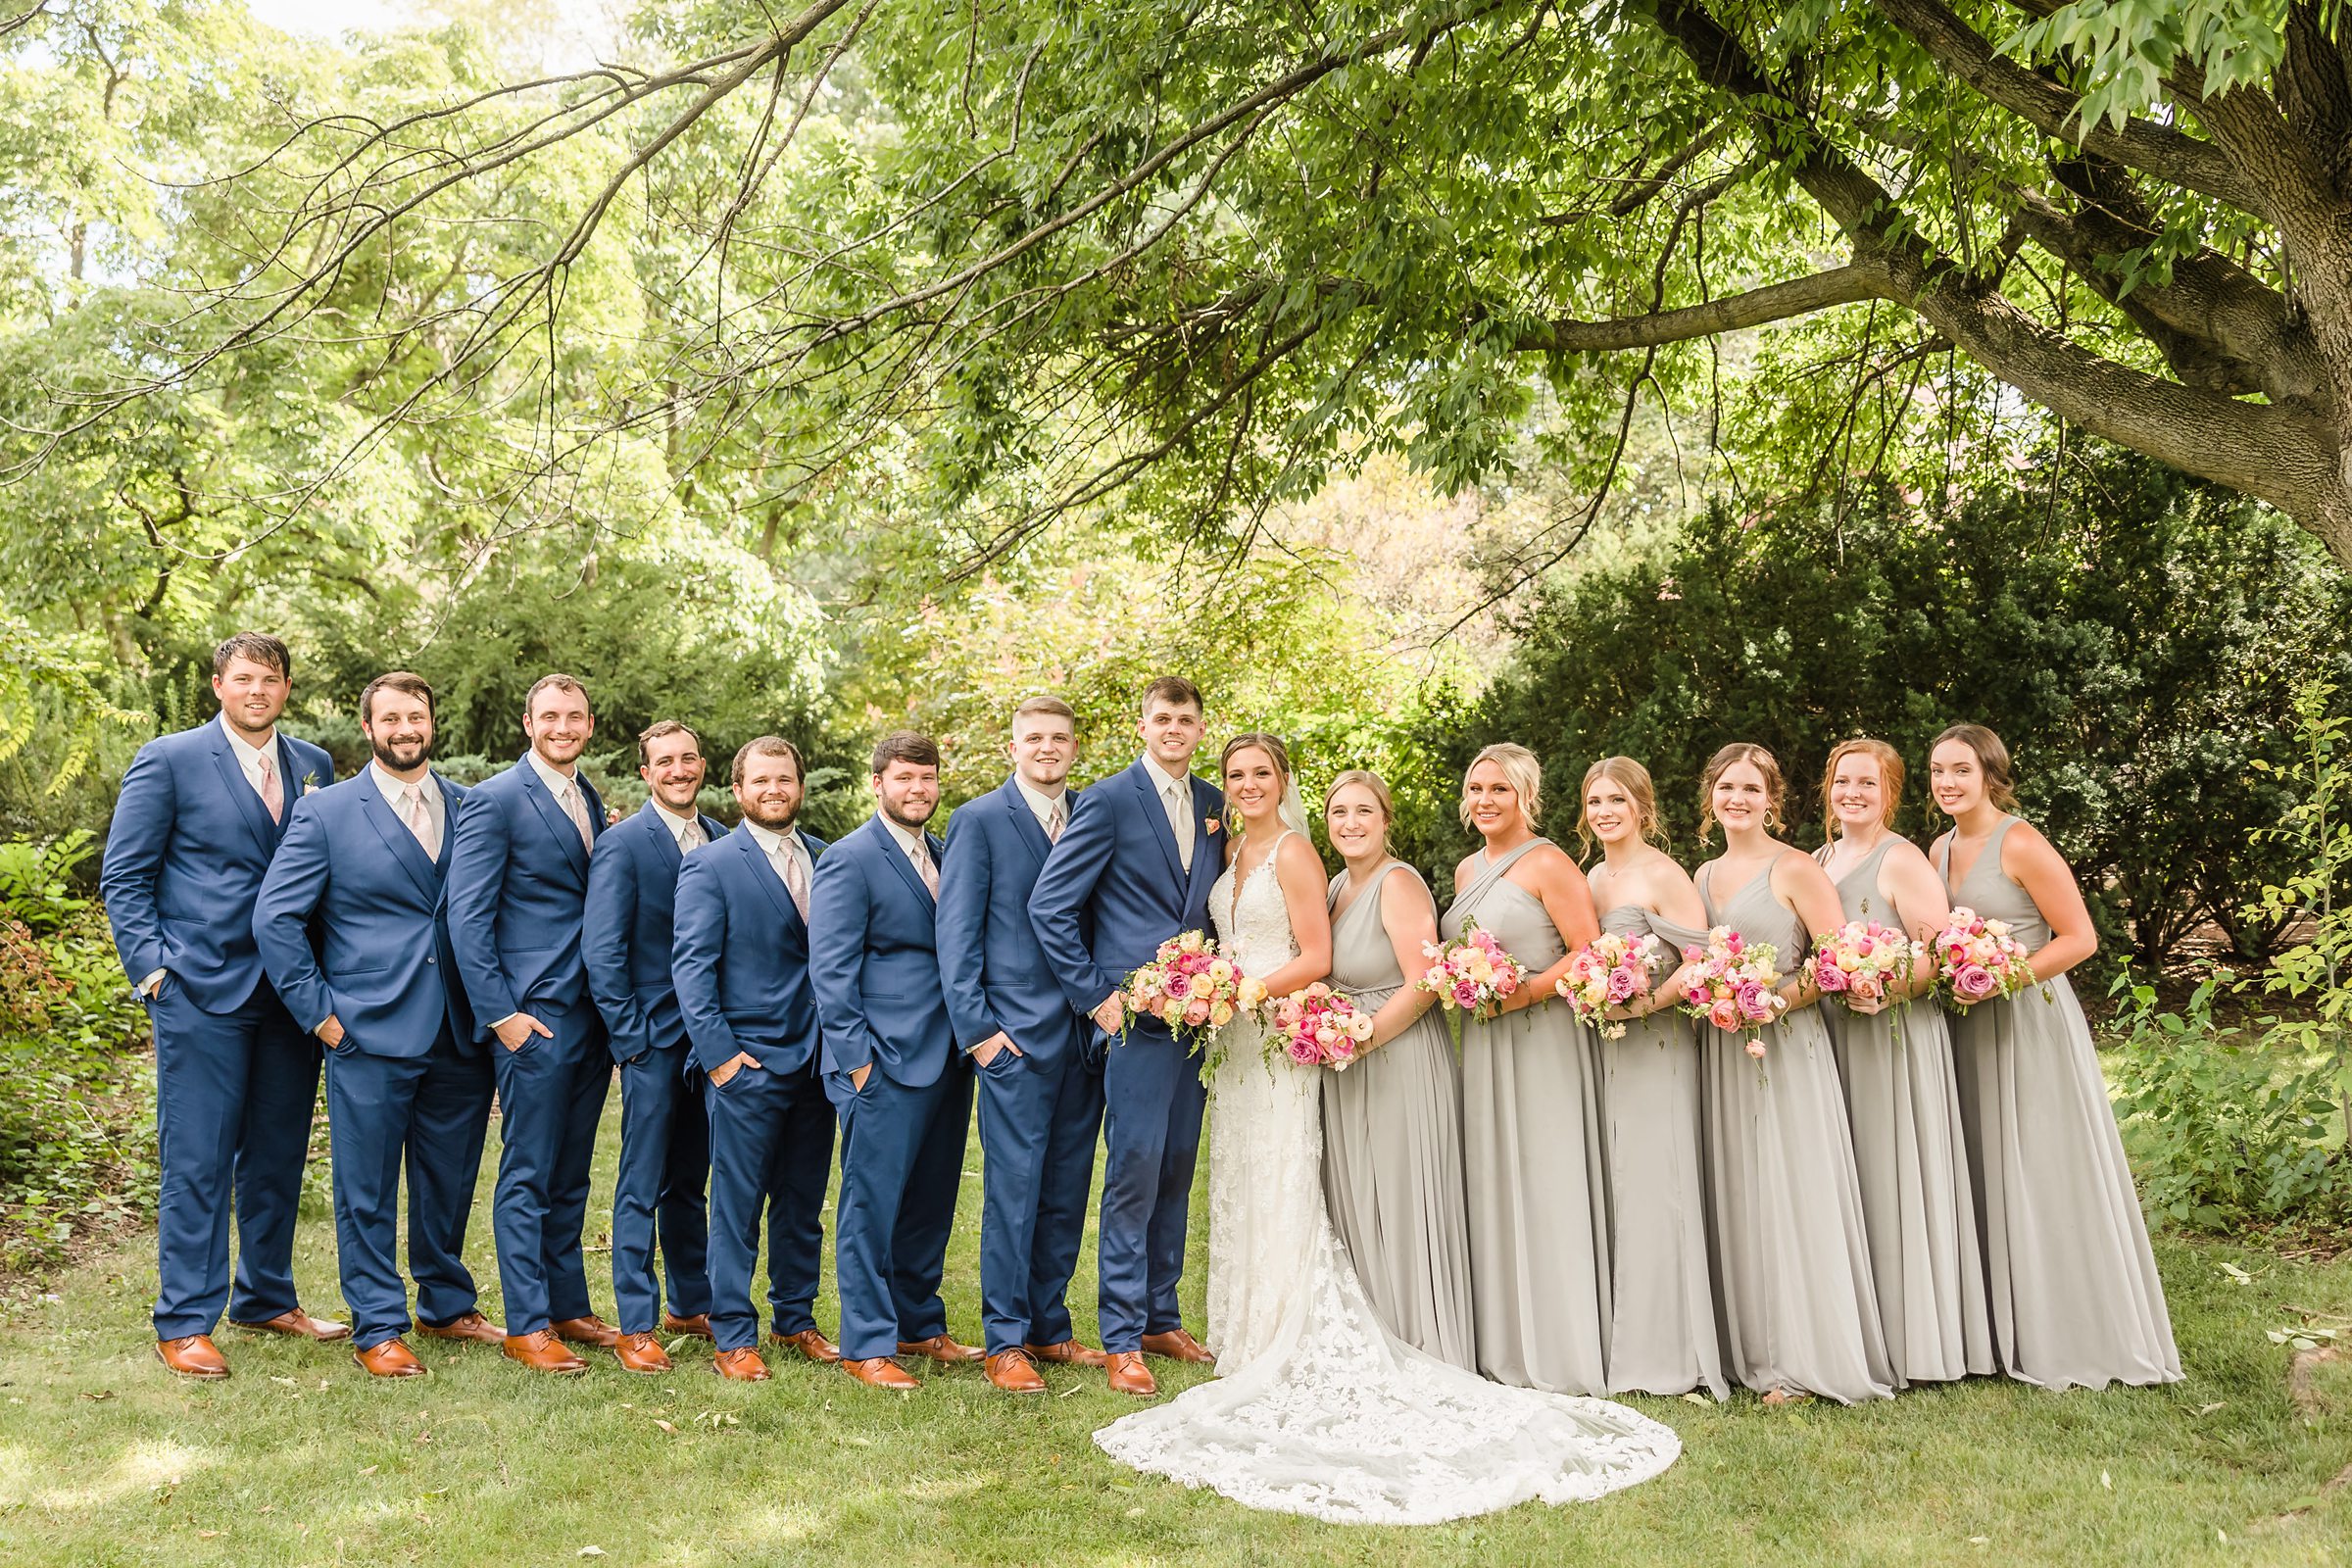 Full bridal party during a wedding at the Luthy Botanical Garden in Peoria, Illinois